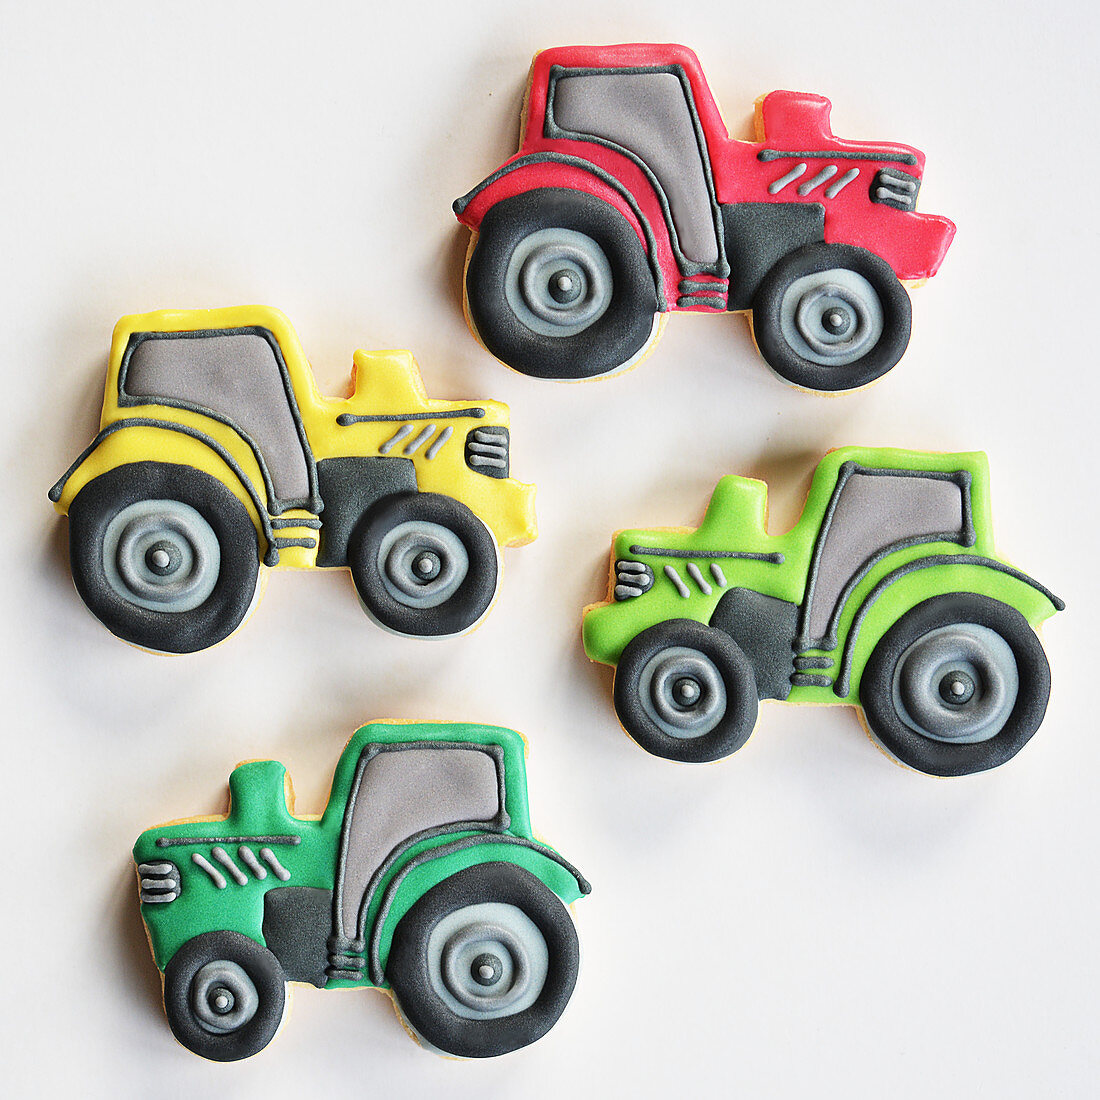 Colorfully decorated cookies in the shape of tractors